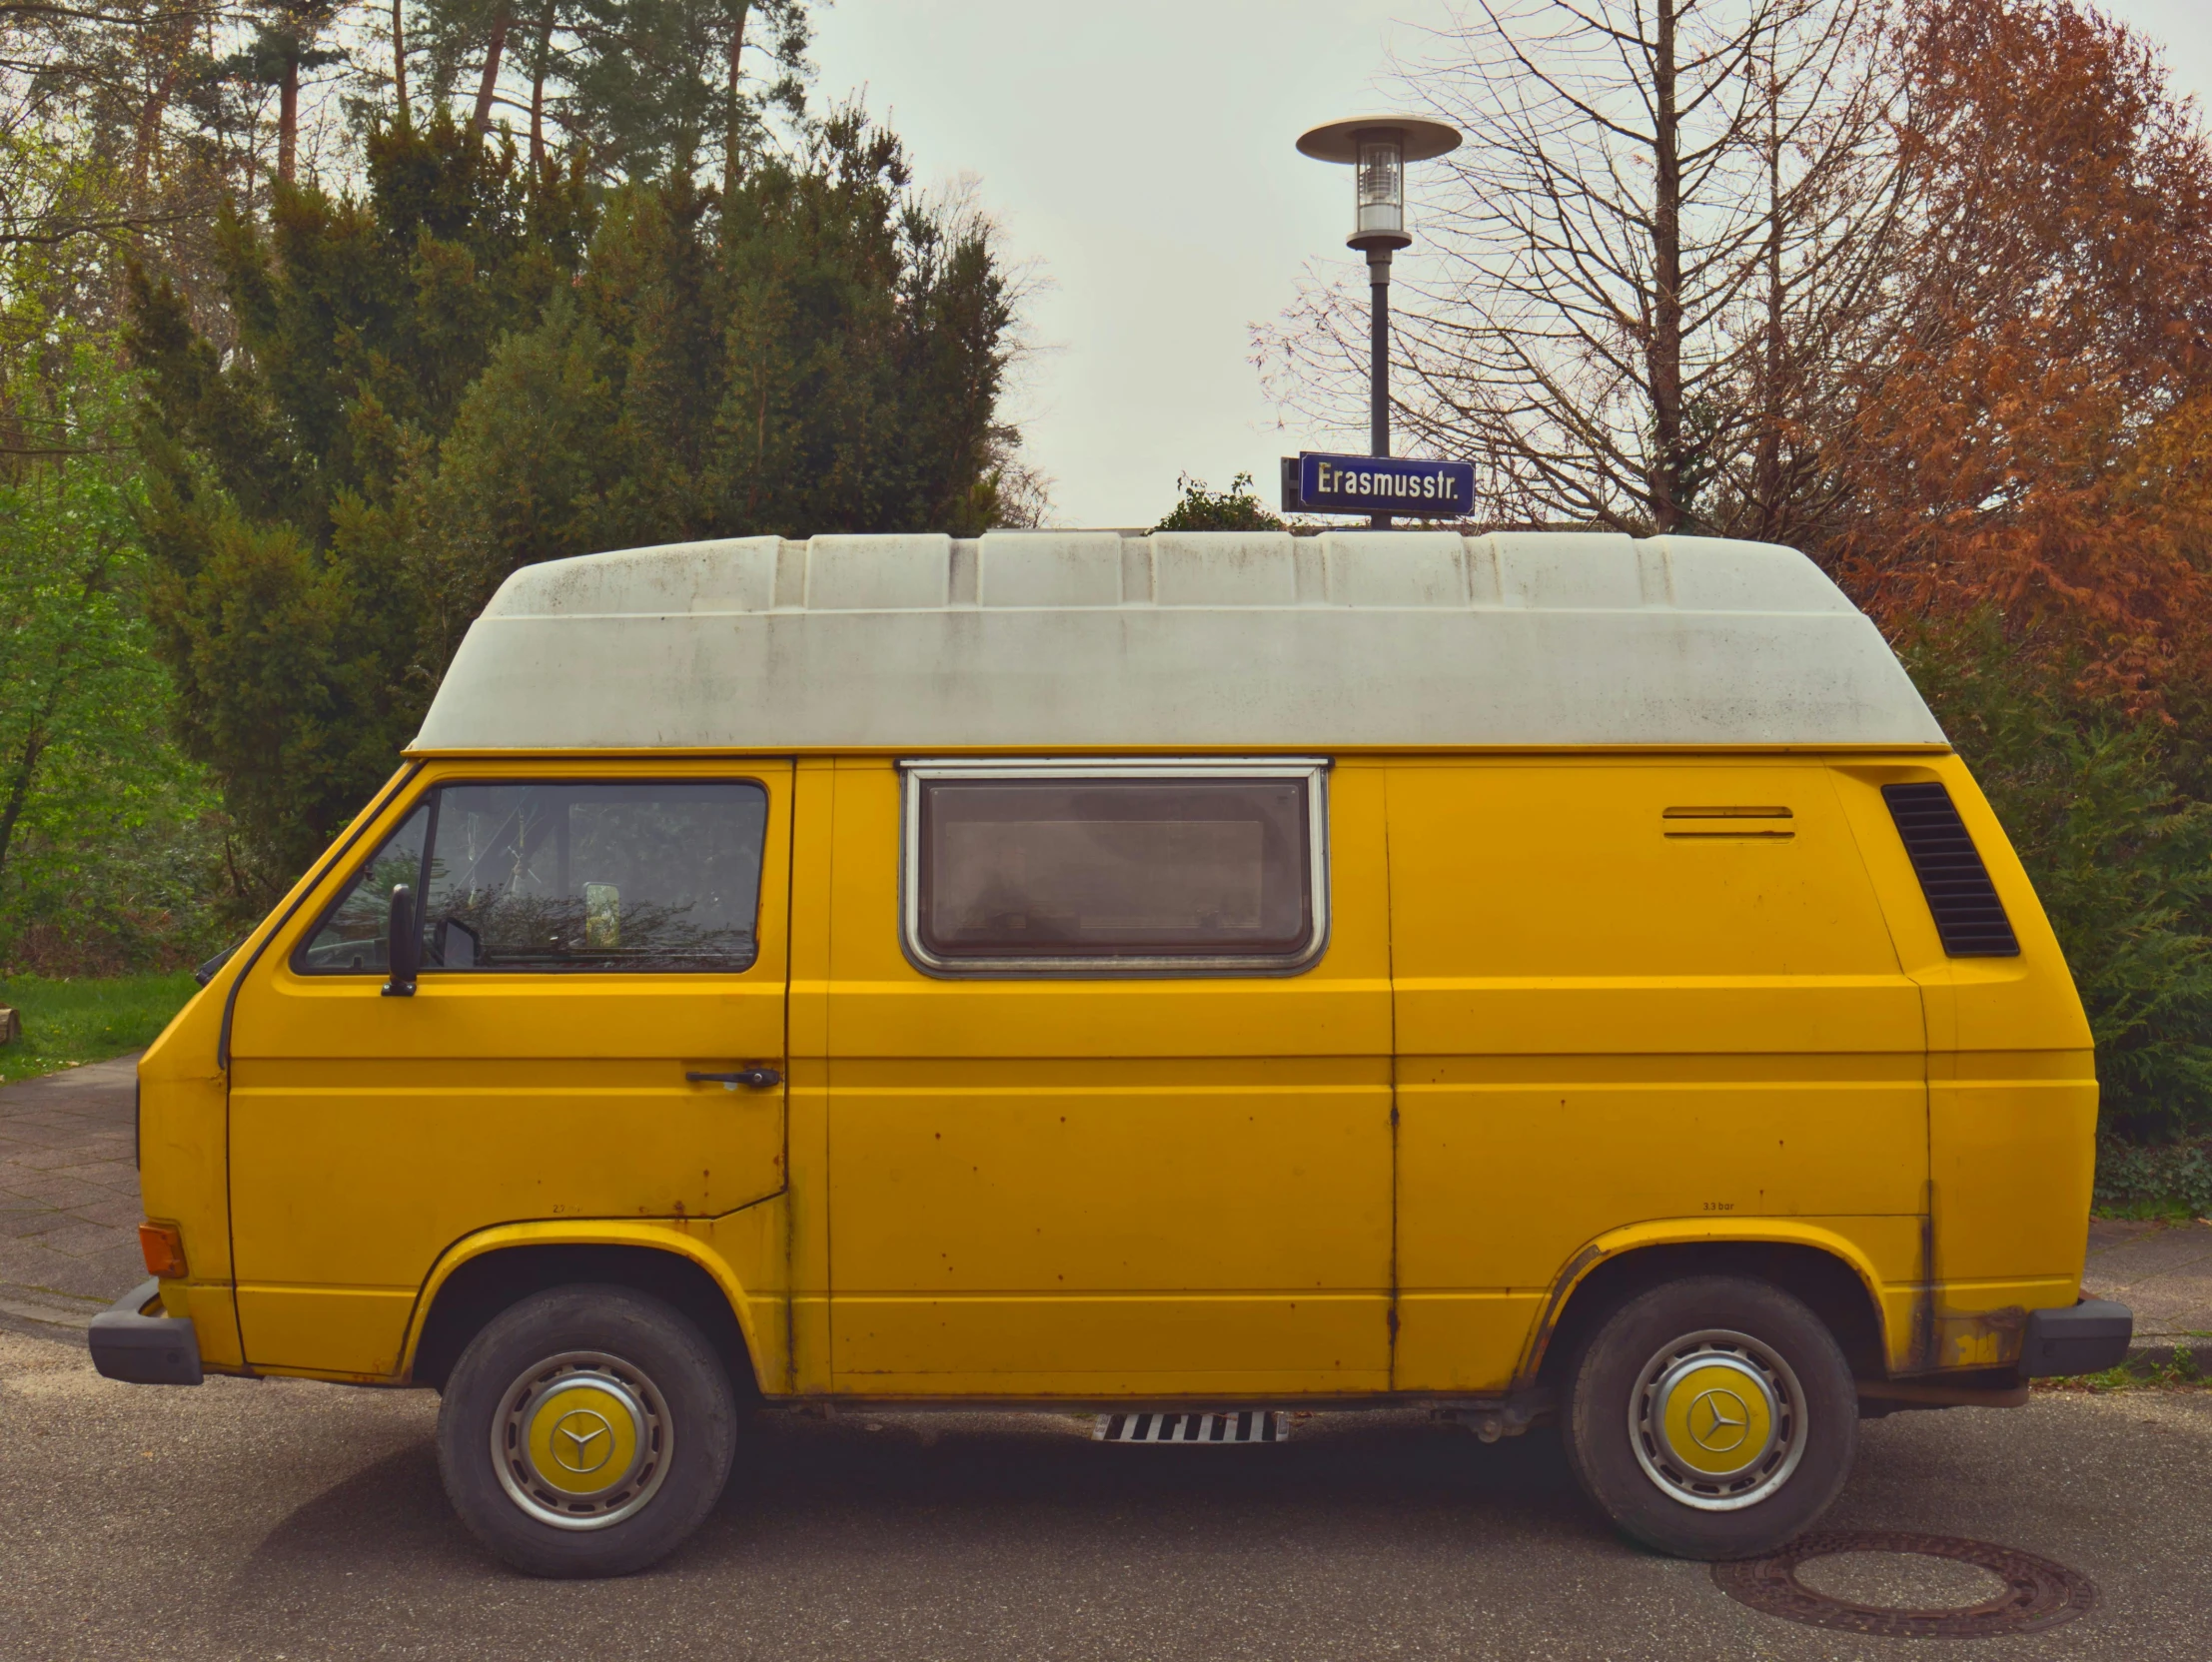 a yellow van with a surfboard on the roof sits in a parking lot